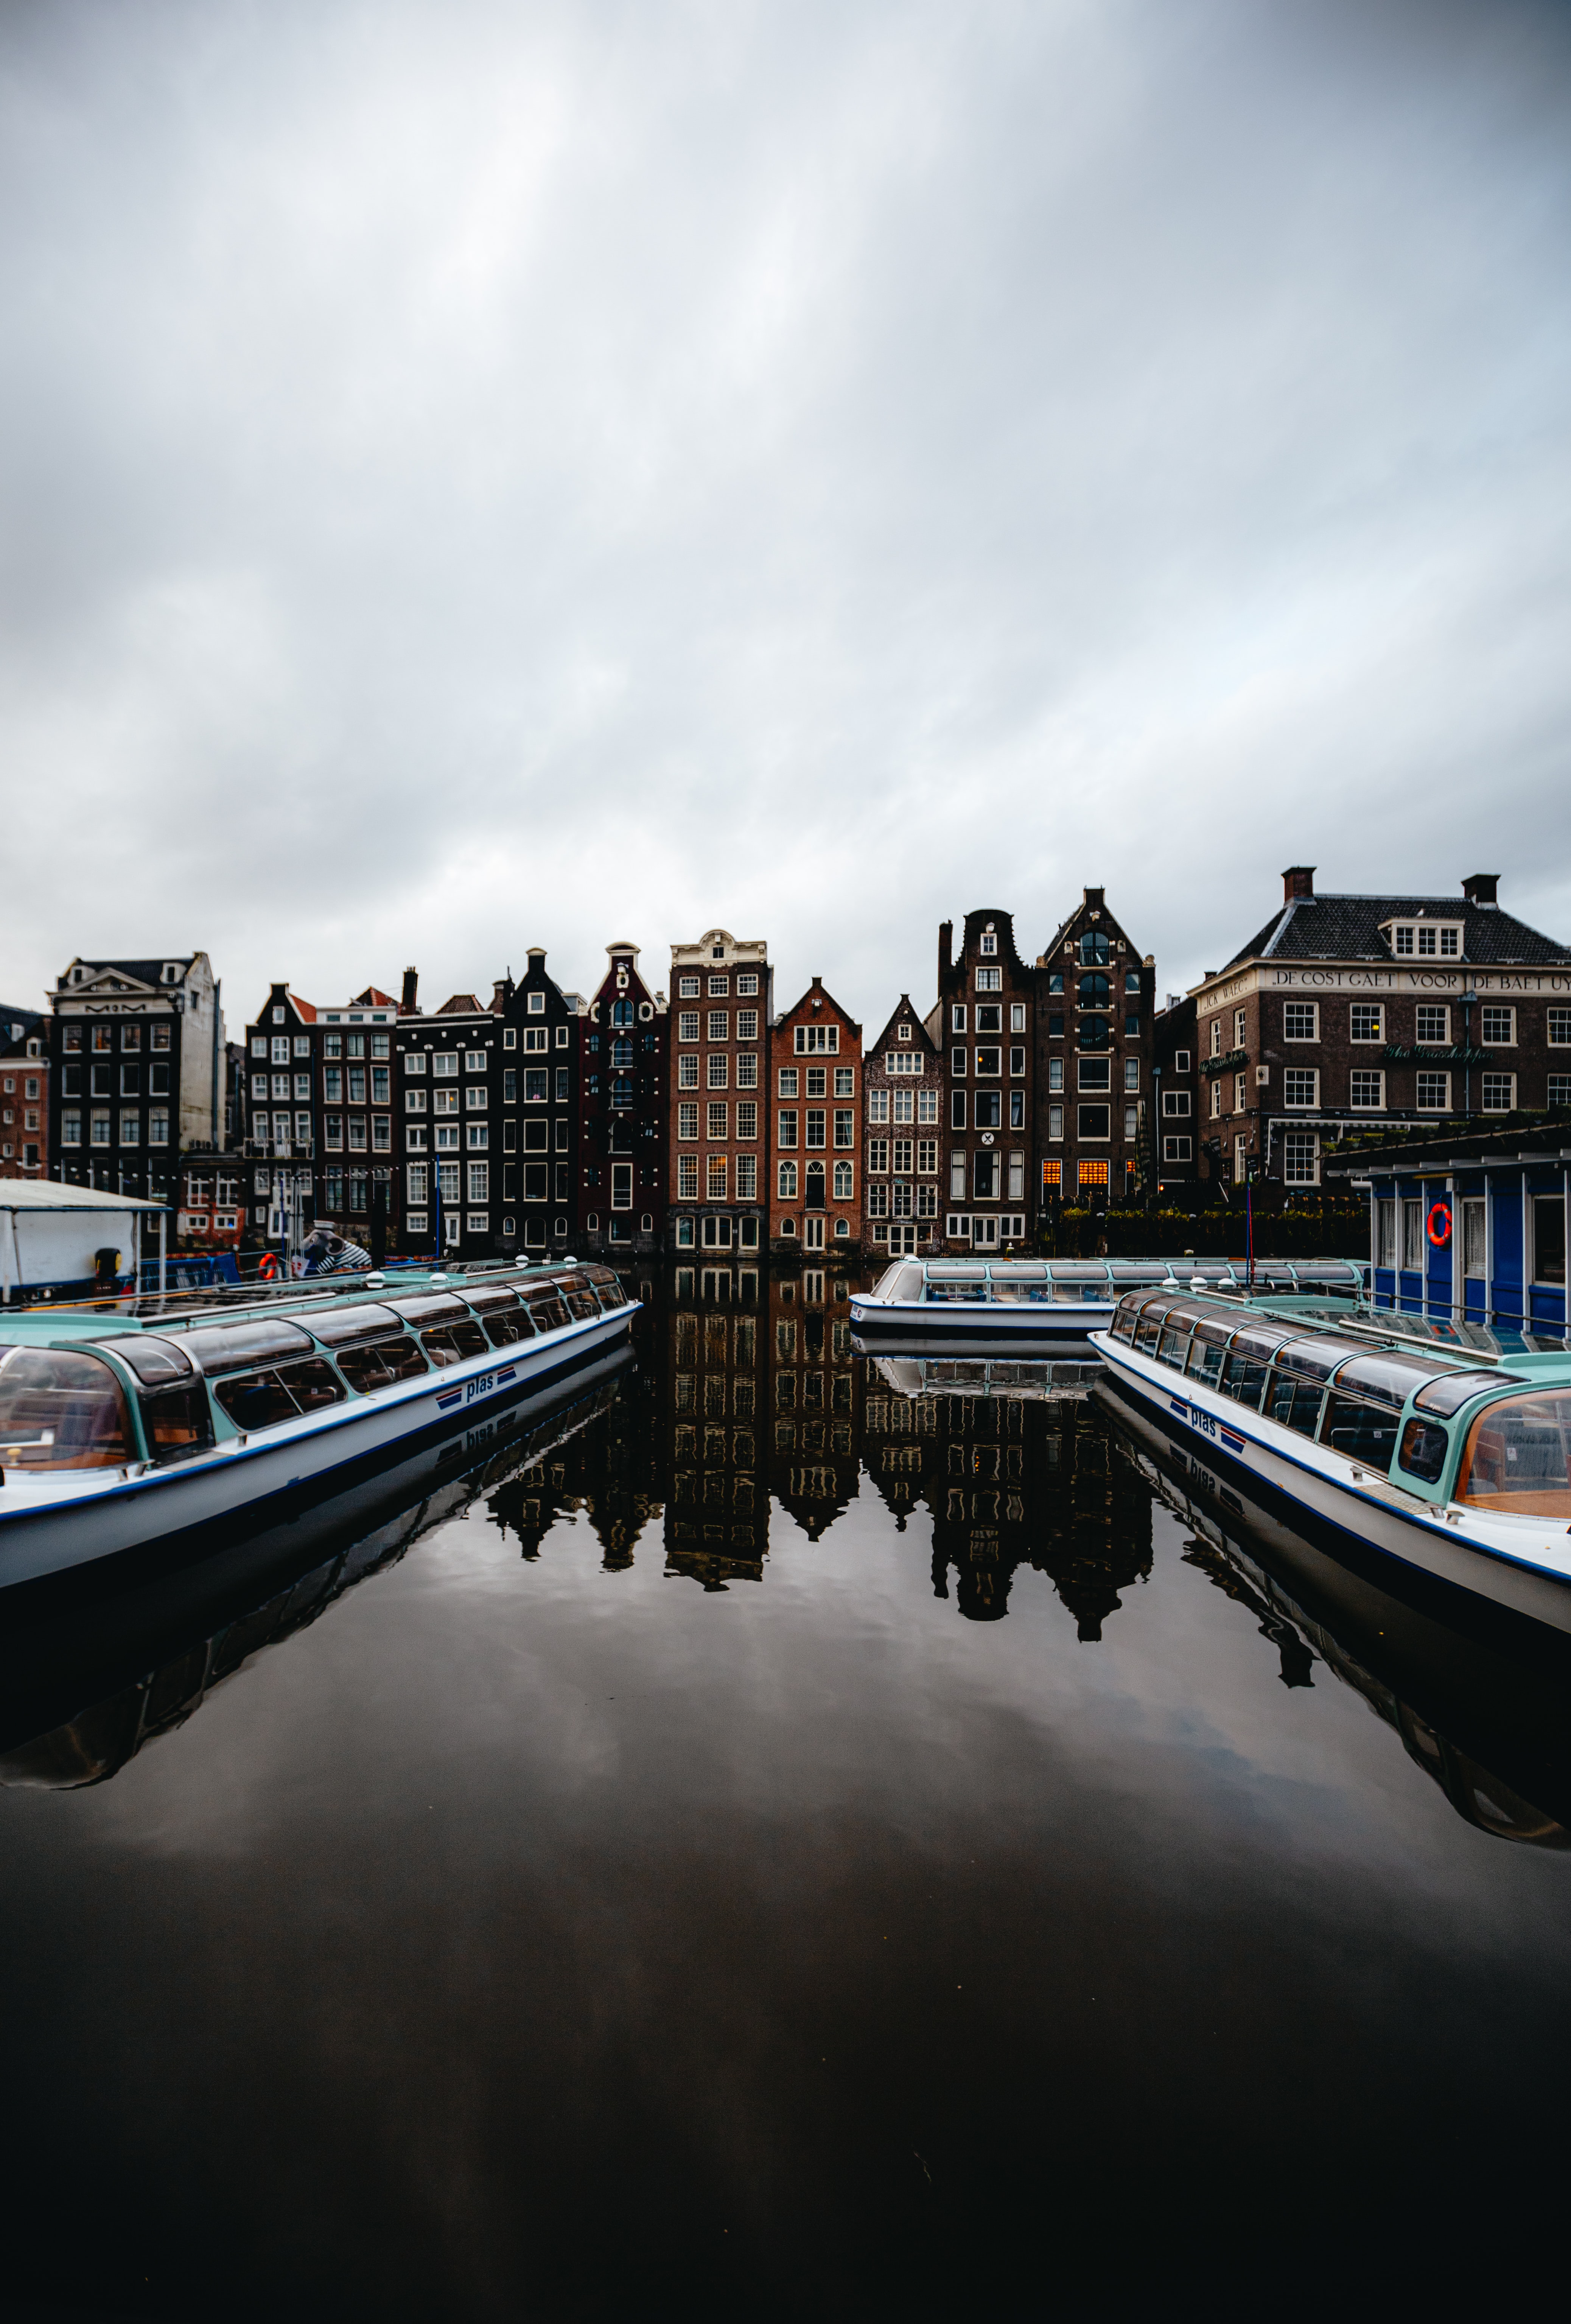 rivers, amsterdam, architecture, cities, boats, city, building